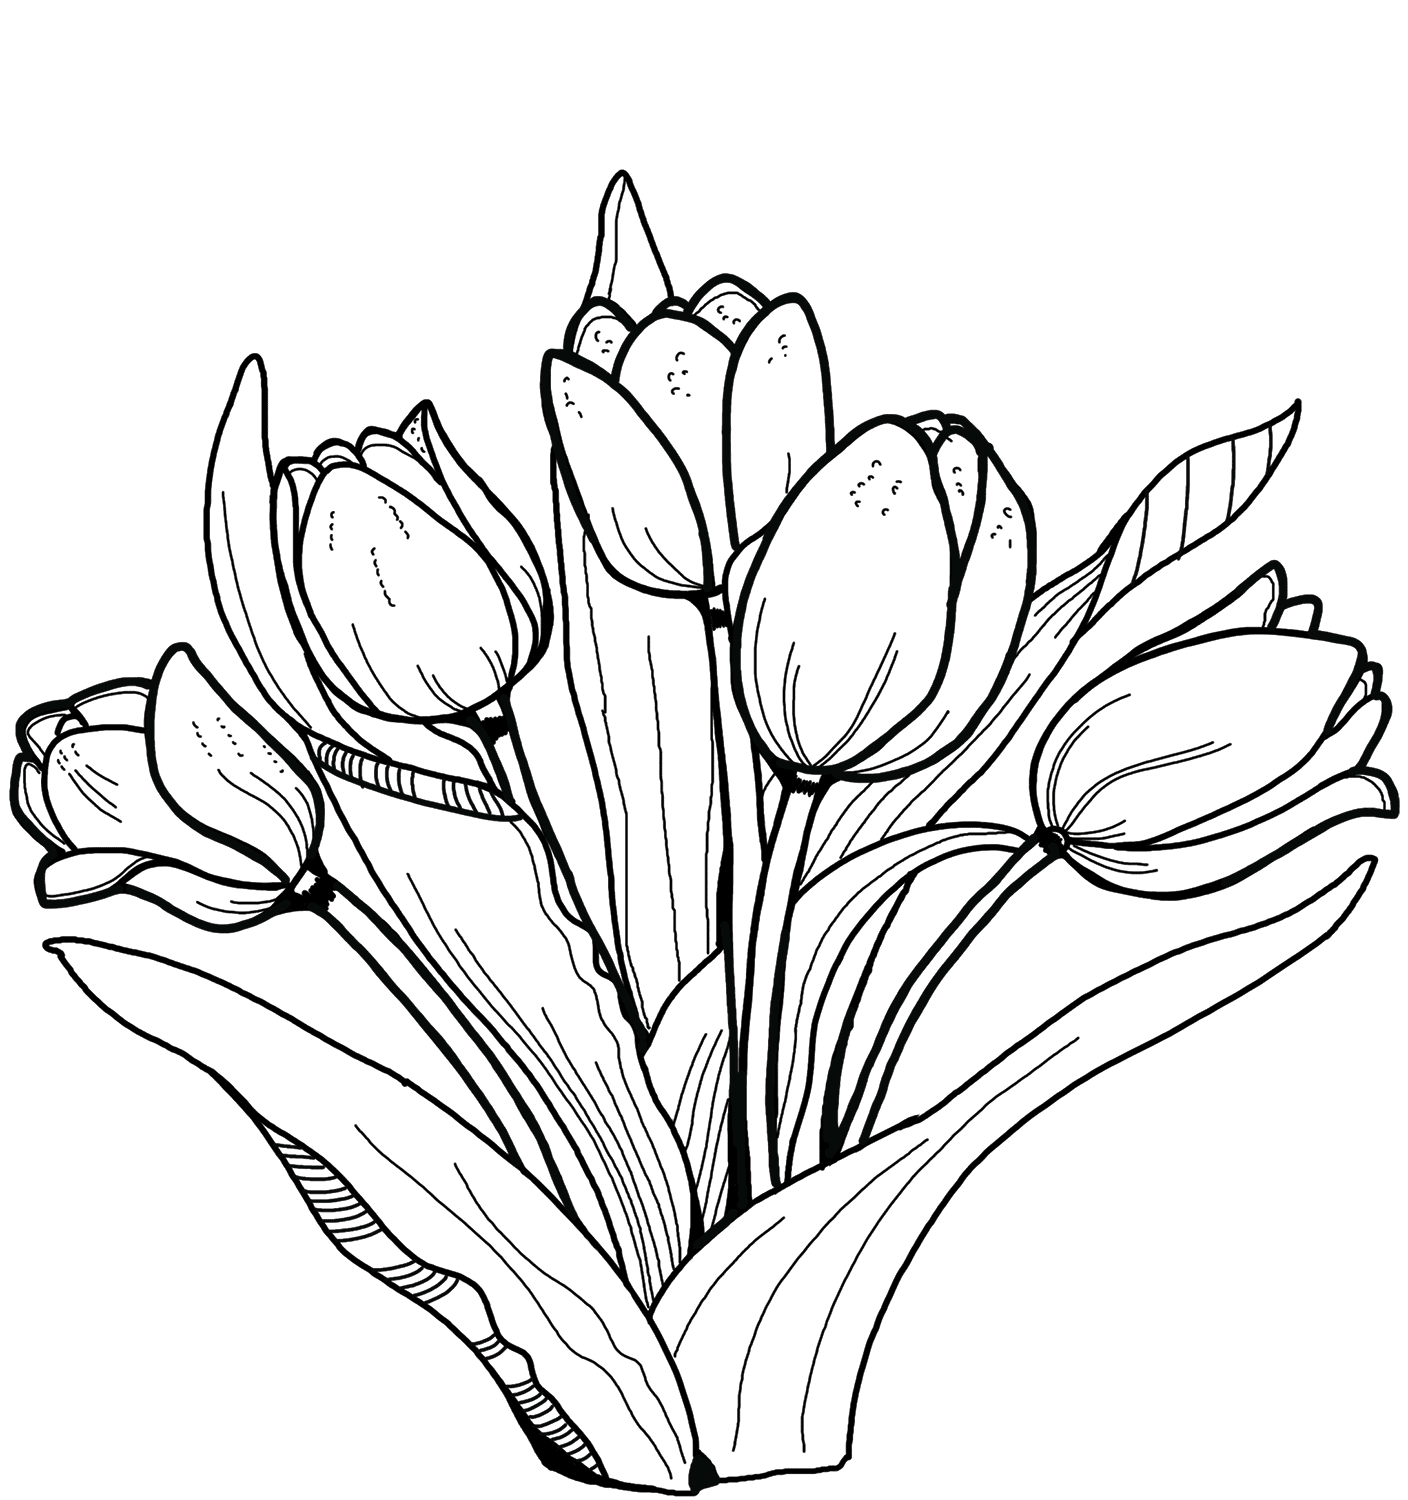 Coloring page Tulips Lots of tulips